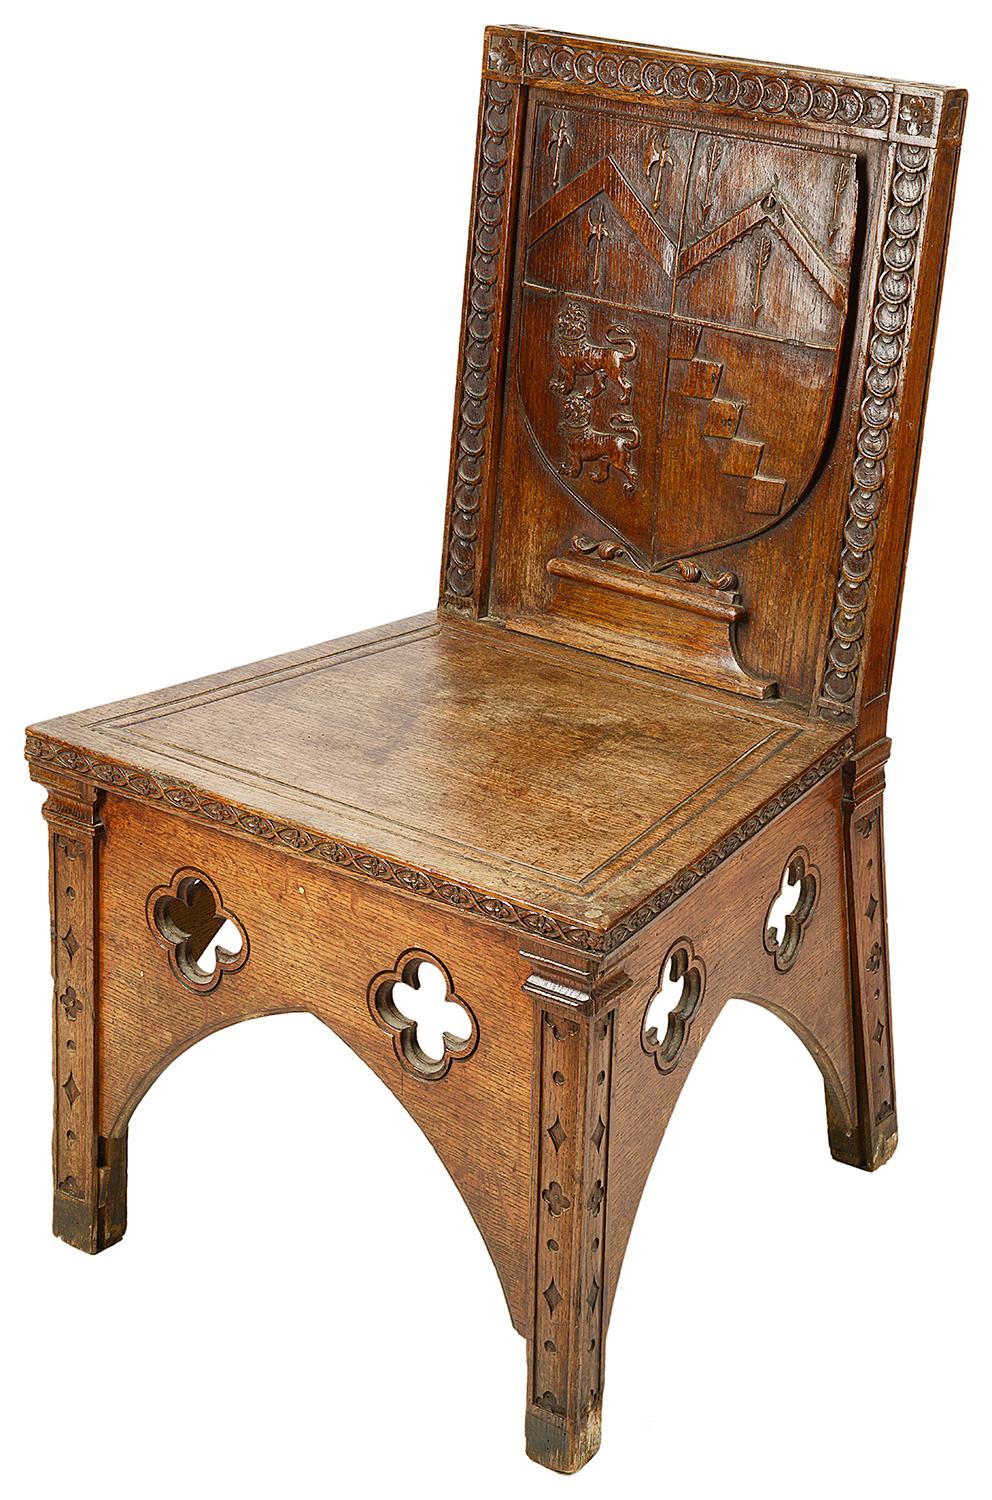 A rare pair of 18th century oak hall chairs made for col Ralph congreve of aldermaston manor/court.

Each having heraldic family crests.
Aldermaston manor/court berkshire:
1, Congreve family inheritance (1752–1843)

 

 The Congreve coat of arms
In